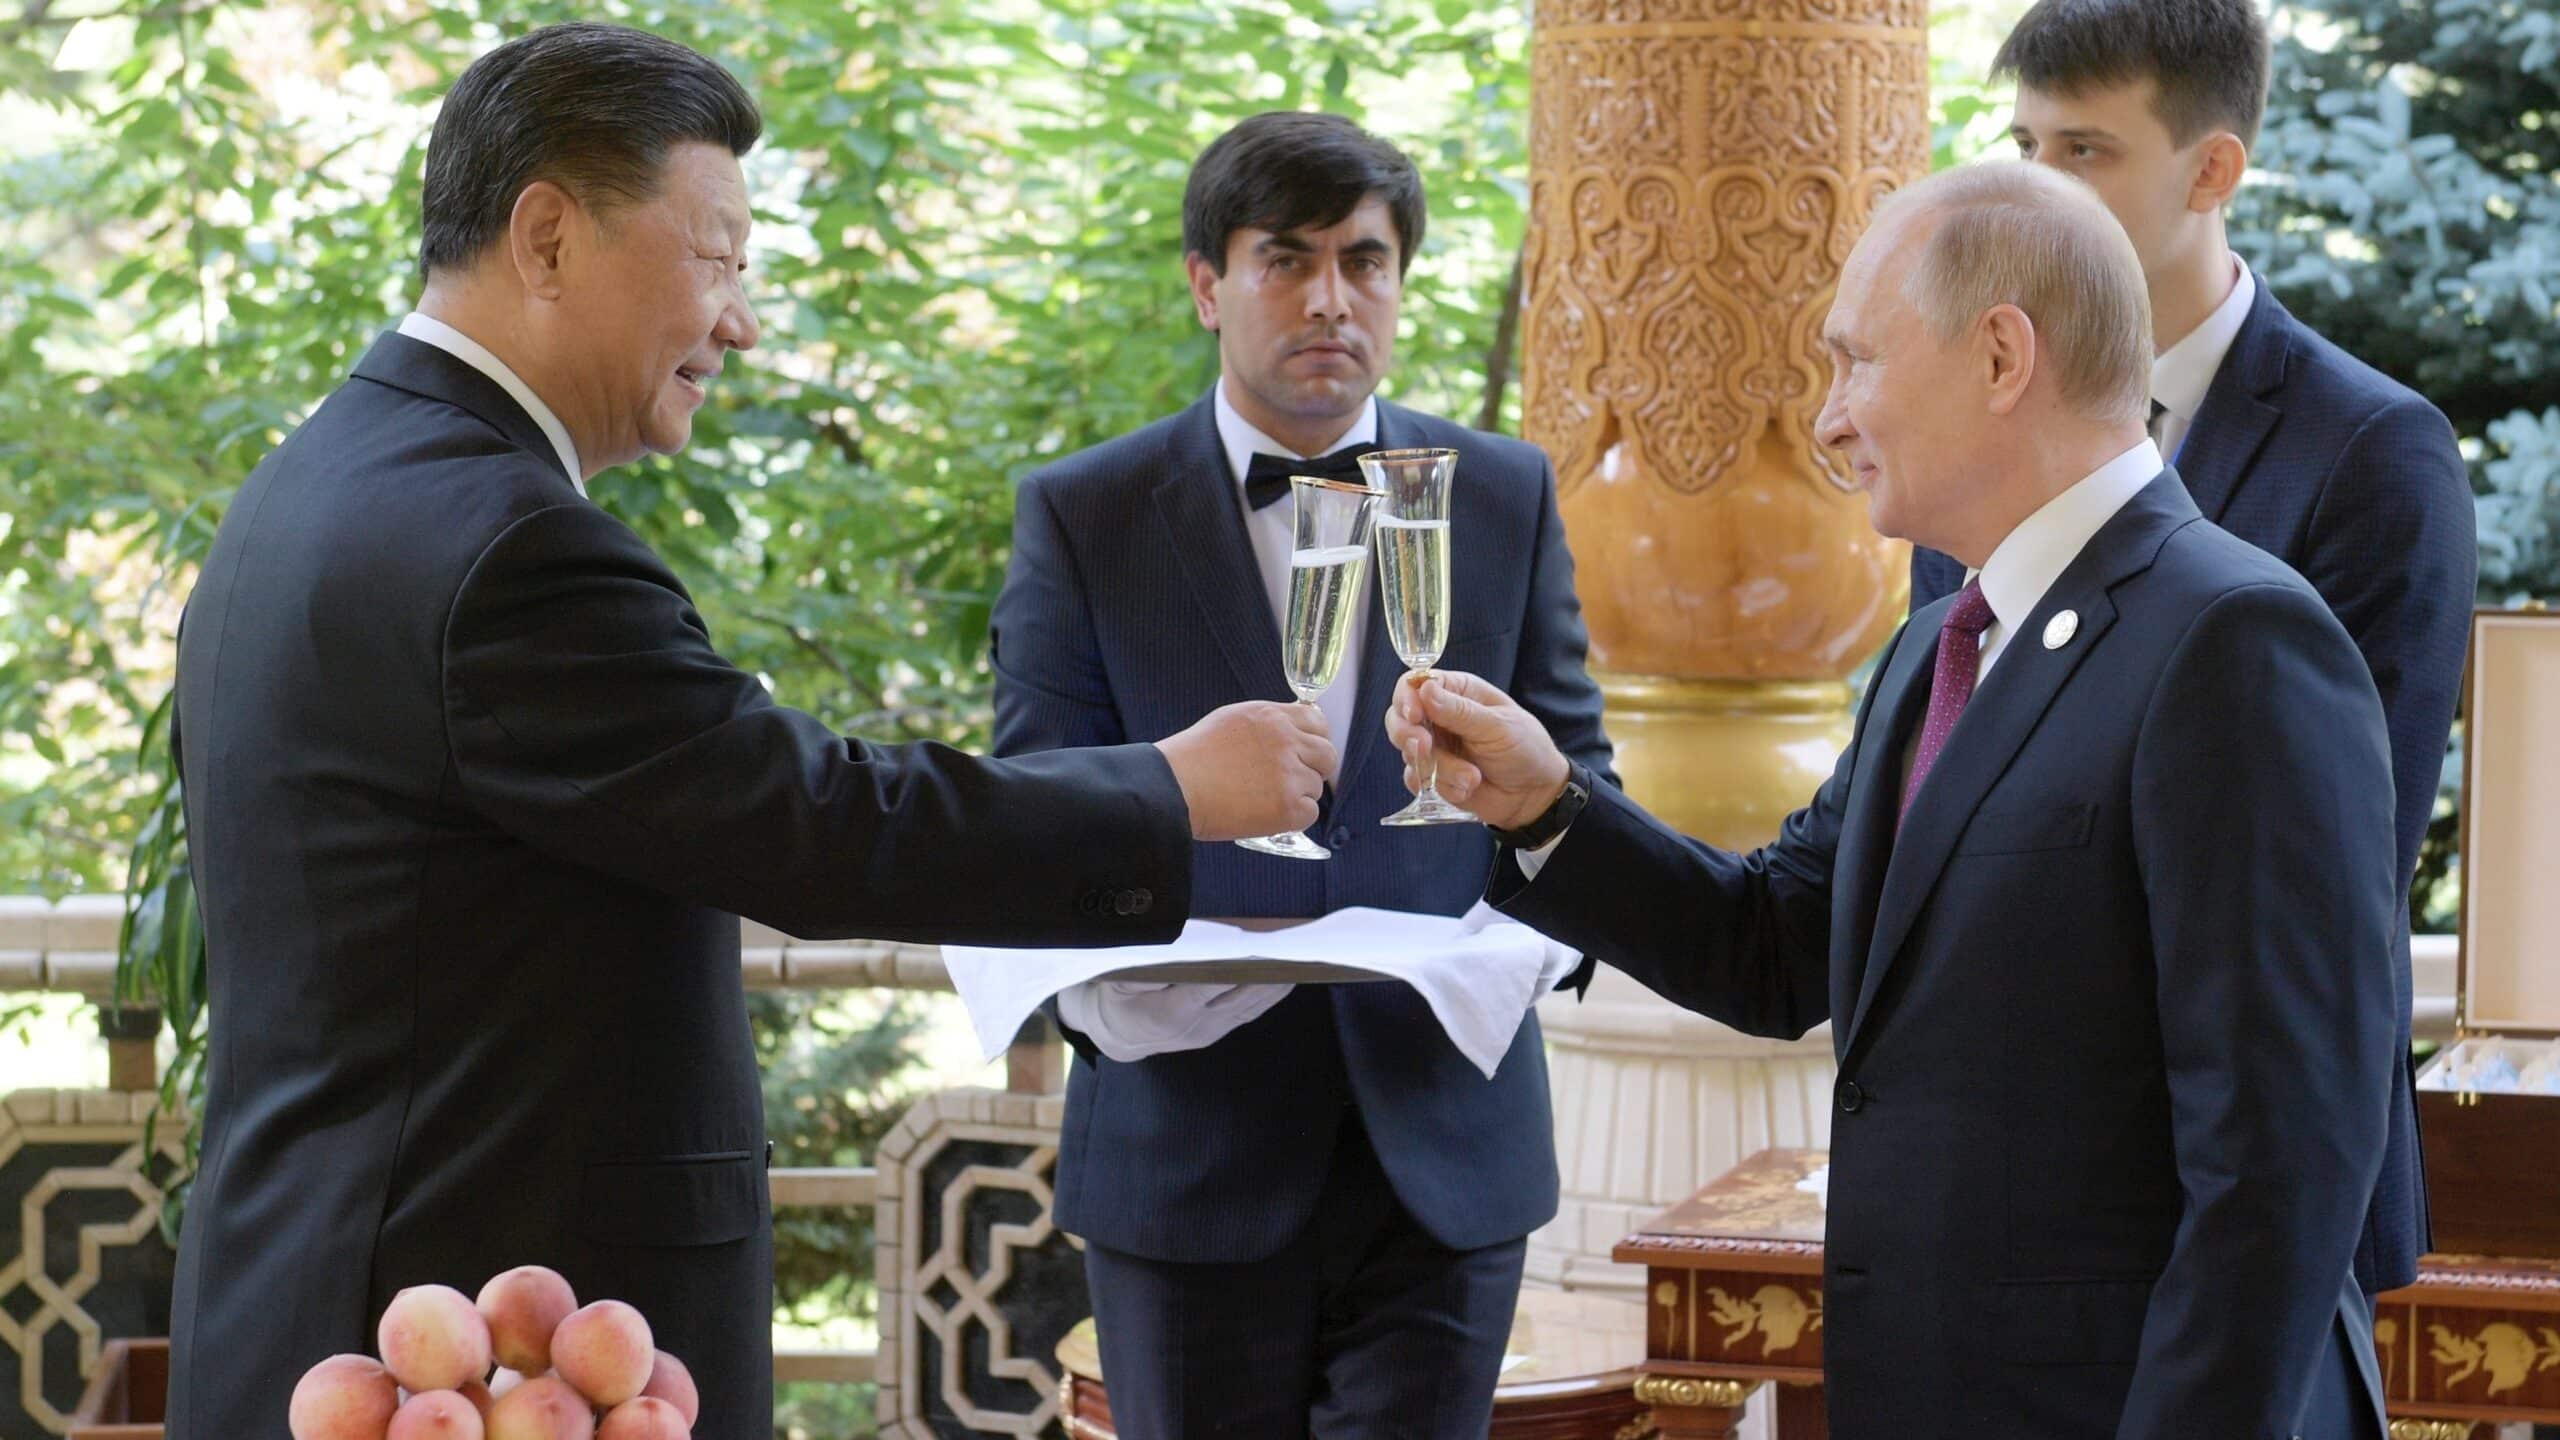 Vladimir Putin and Xi Jinping click champagne glasses at a dinner.